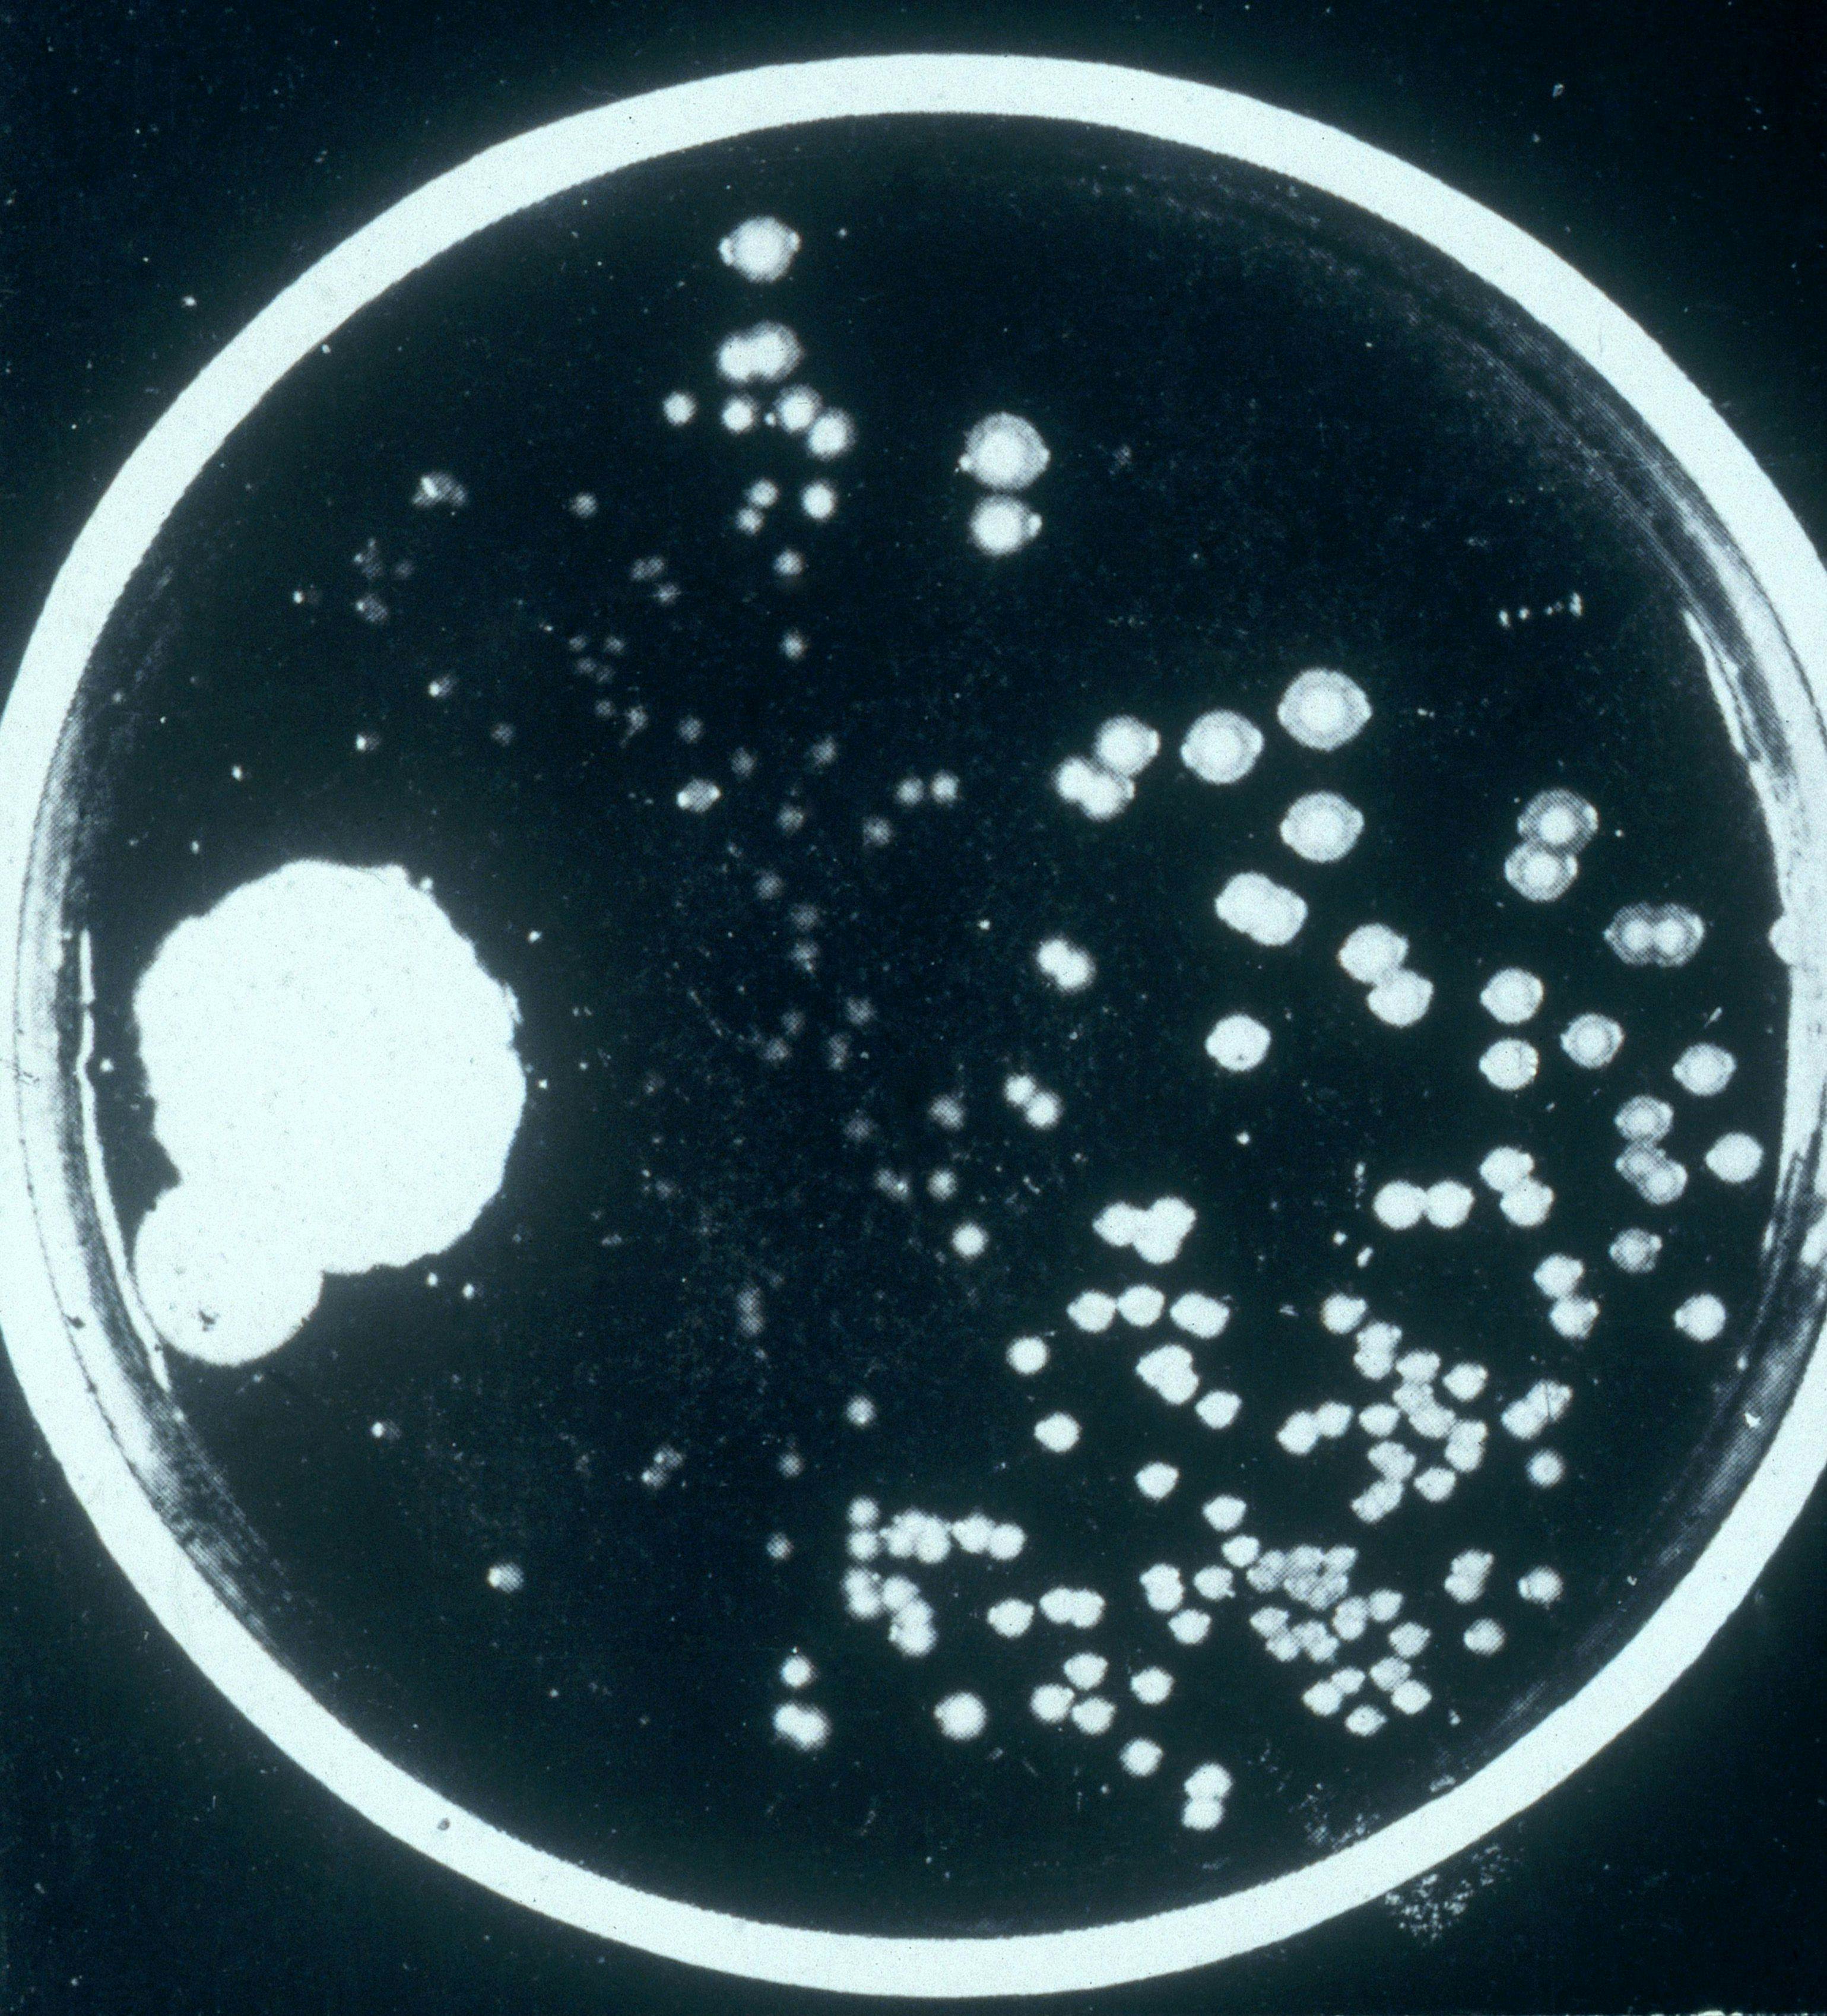 Historic image of Alexander Fleming's original "contaminated" plate which led to the discovery of penicillin. Image credit: Biophoto Associates / Science Source